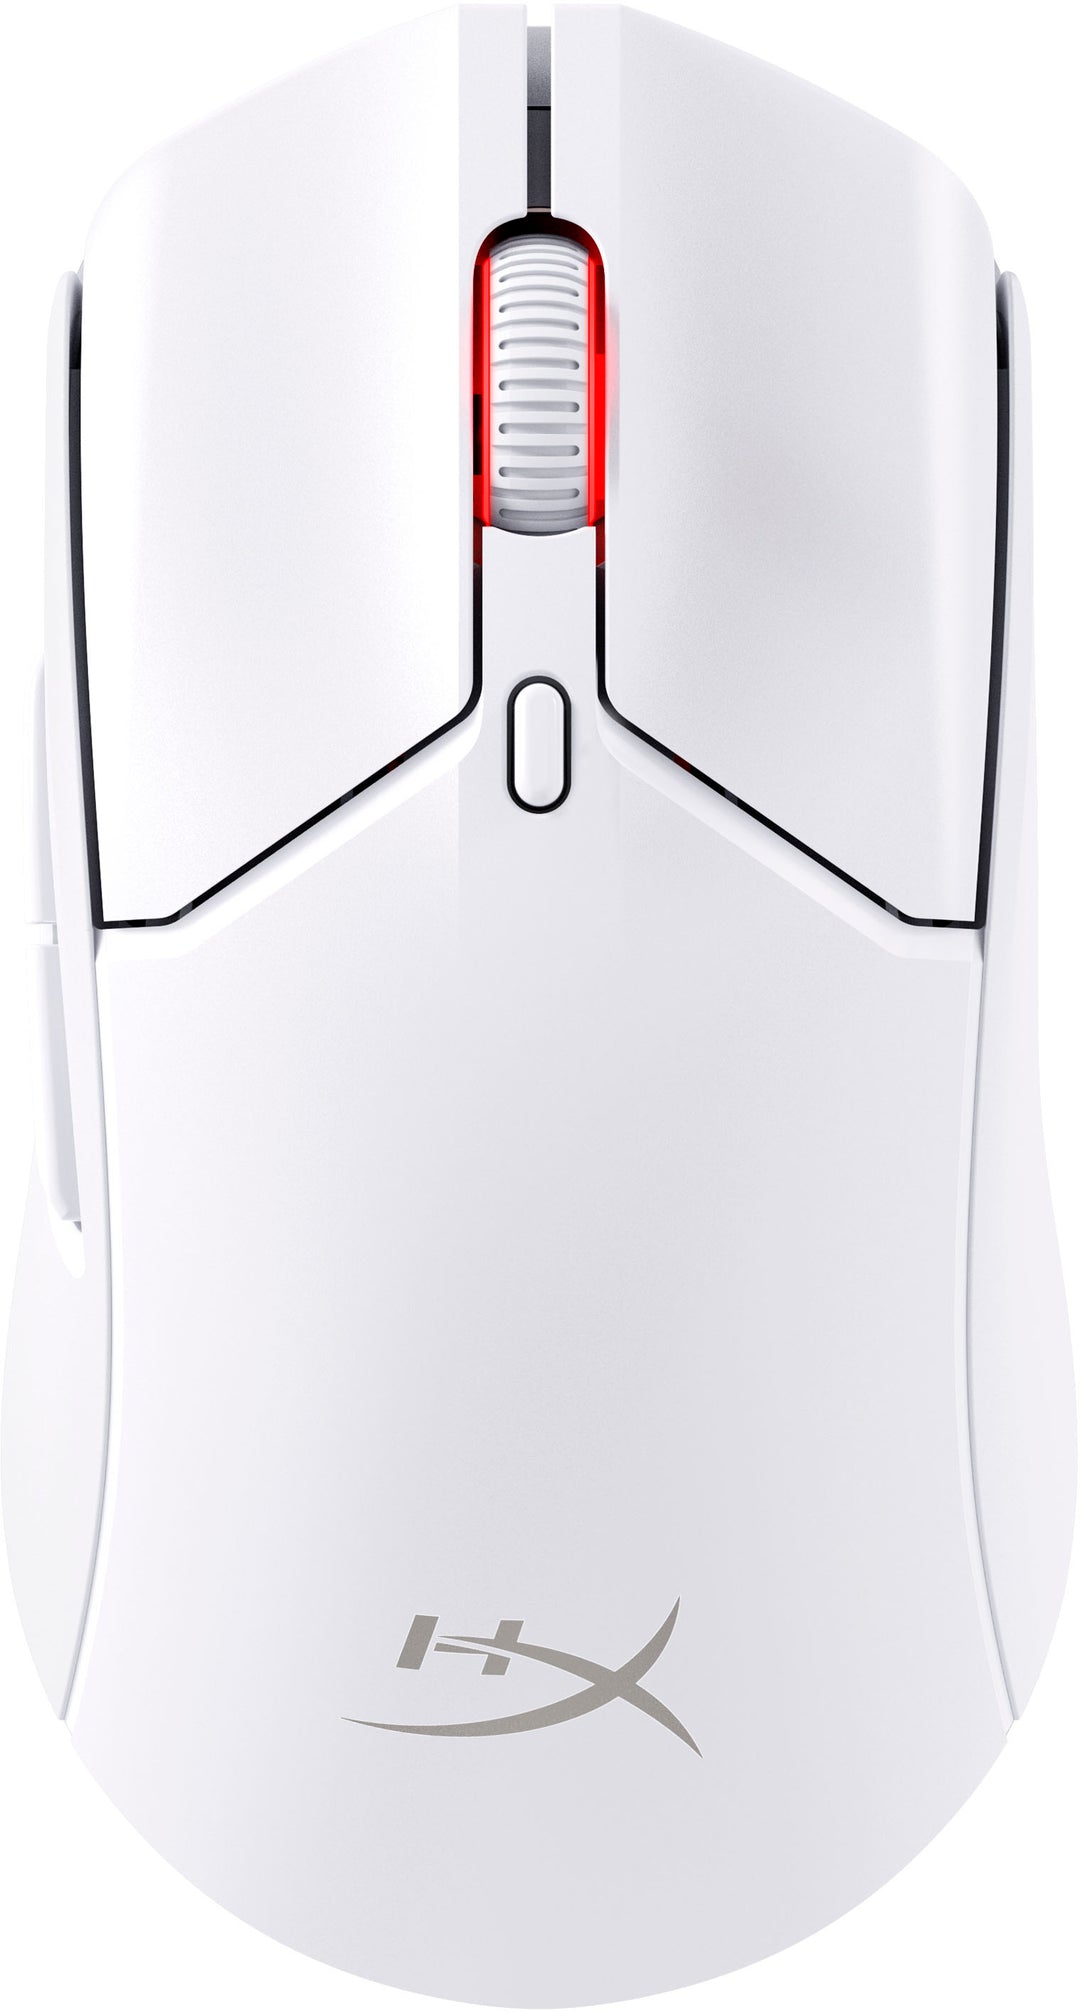 HyperX - Pulsefire Haste 2 Lightweight Wireless Optical Gaming Mouse with RGB Lighting - White_0